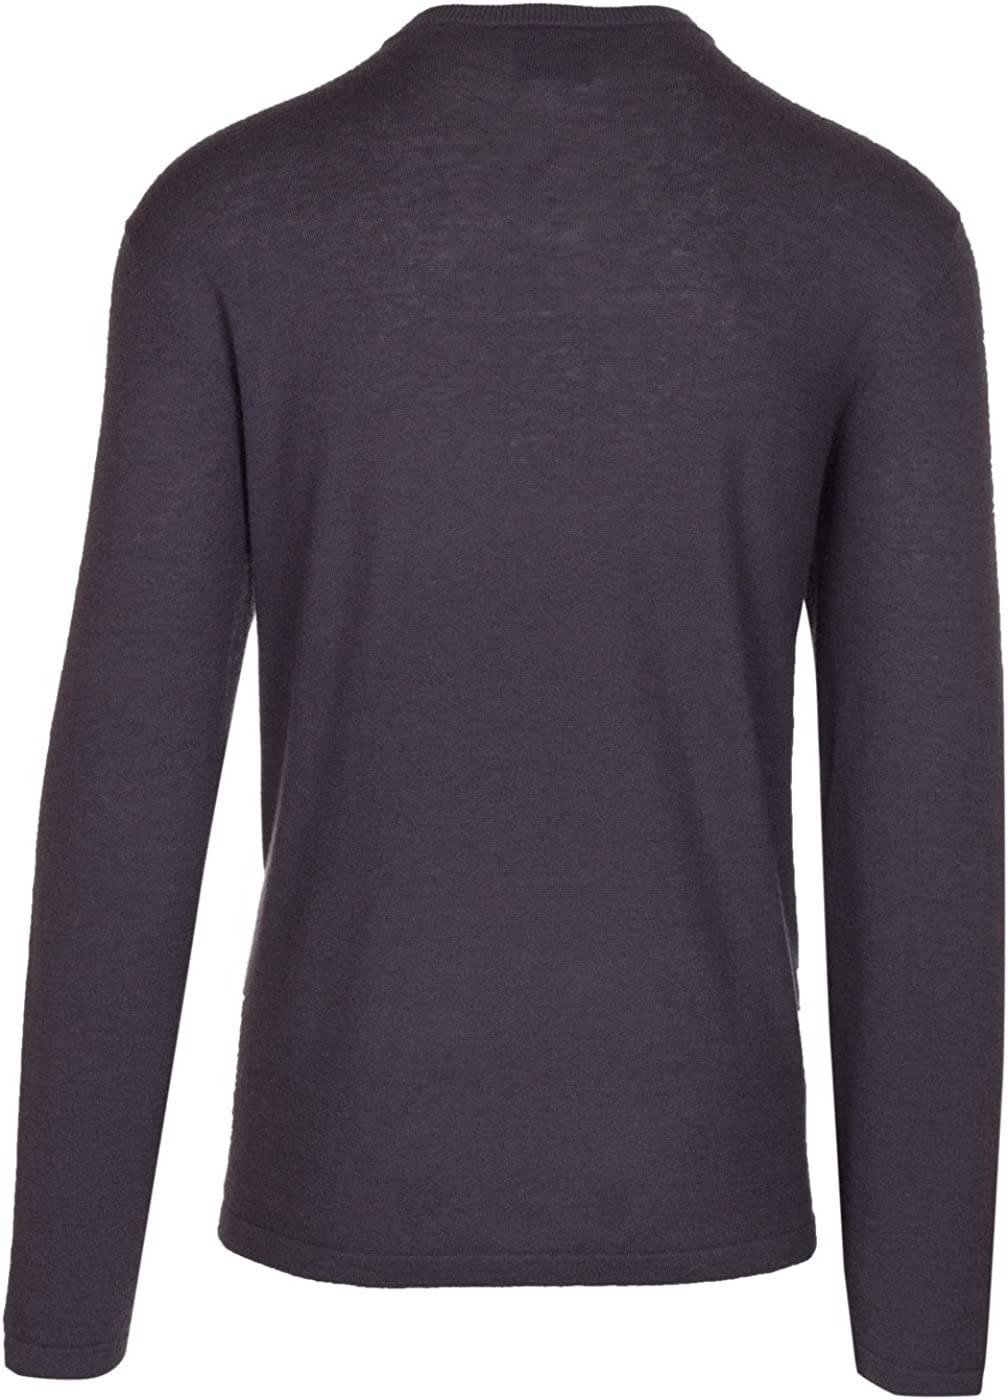 www.couturepoint.com-armani-collezioni-mens-dark-grey-100-wool-pullover-knitwear-high-neck-sweater-copy